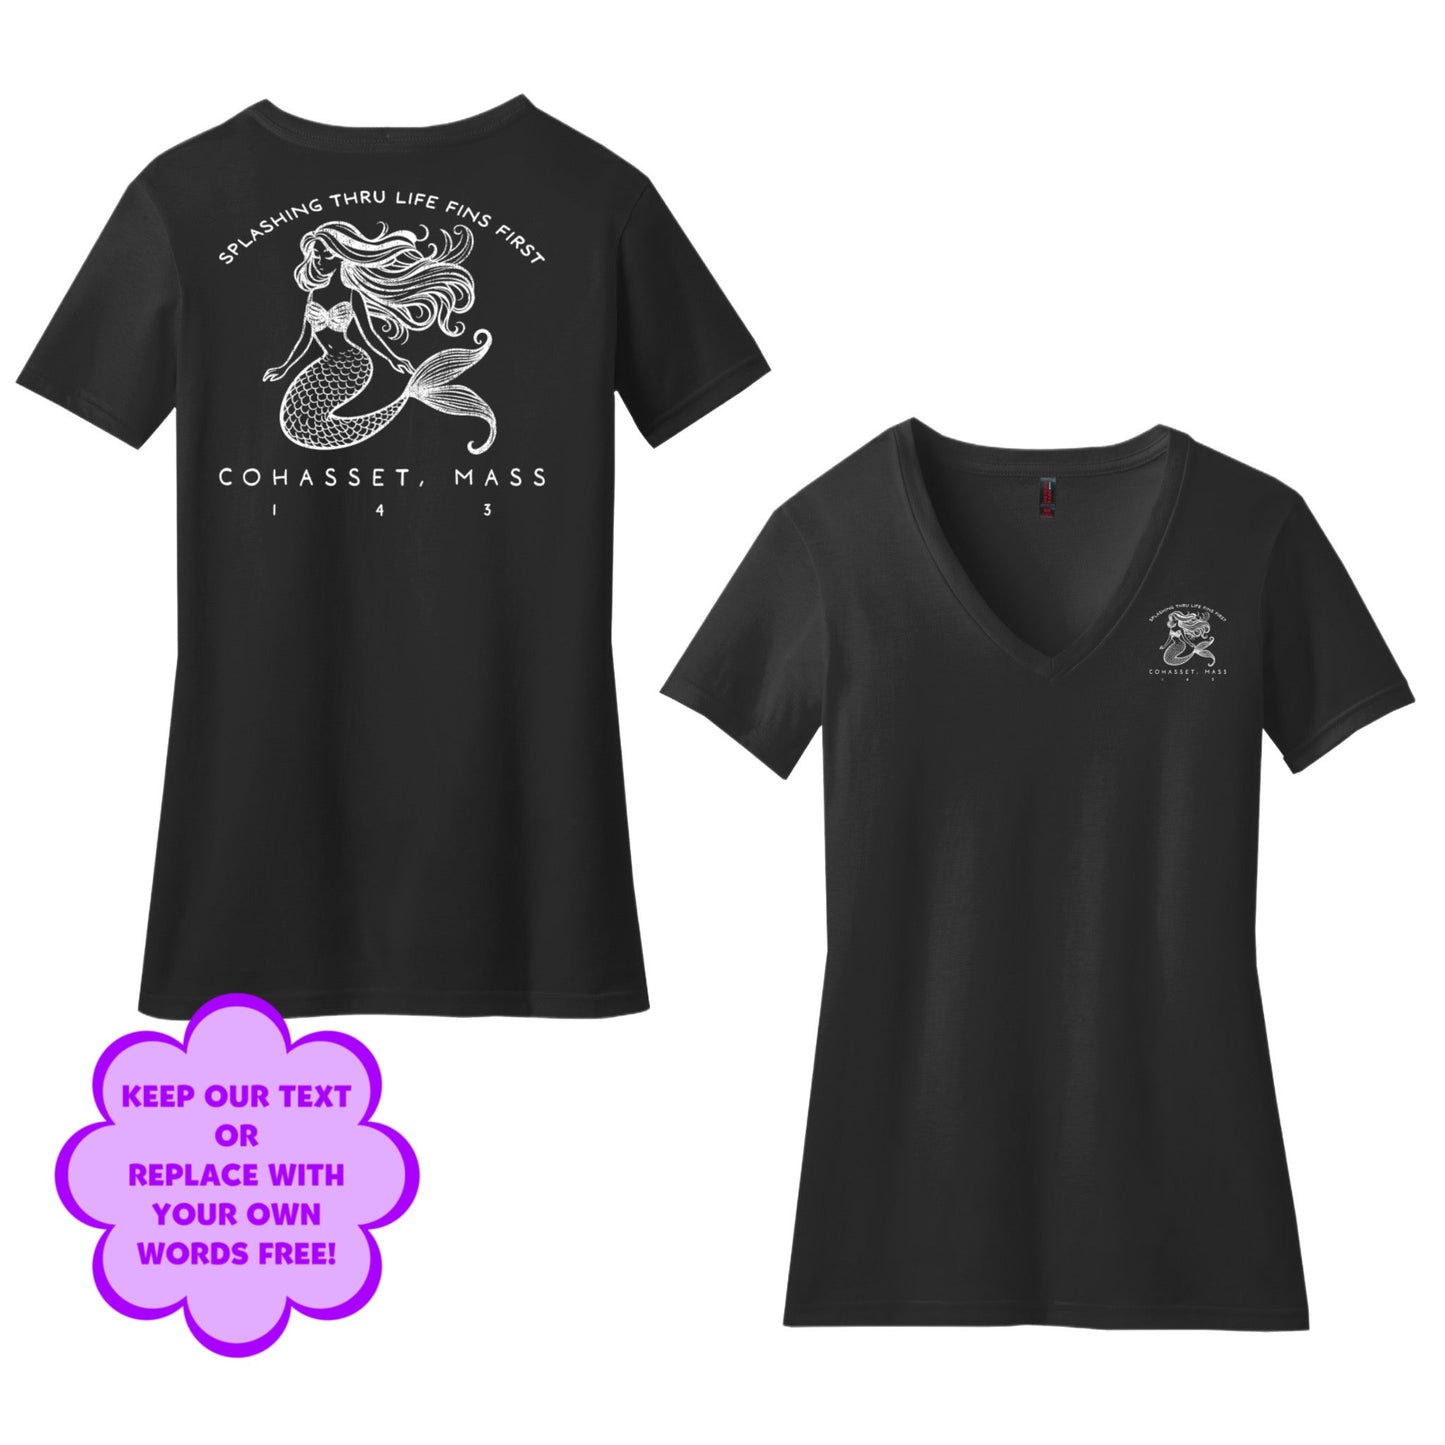 Personalize Free Beach Mermaids, Cohasset, Women’s Cotton Tees from Baby Squid Ink 